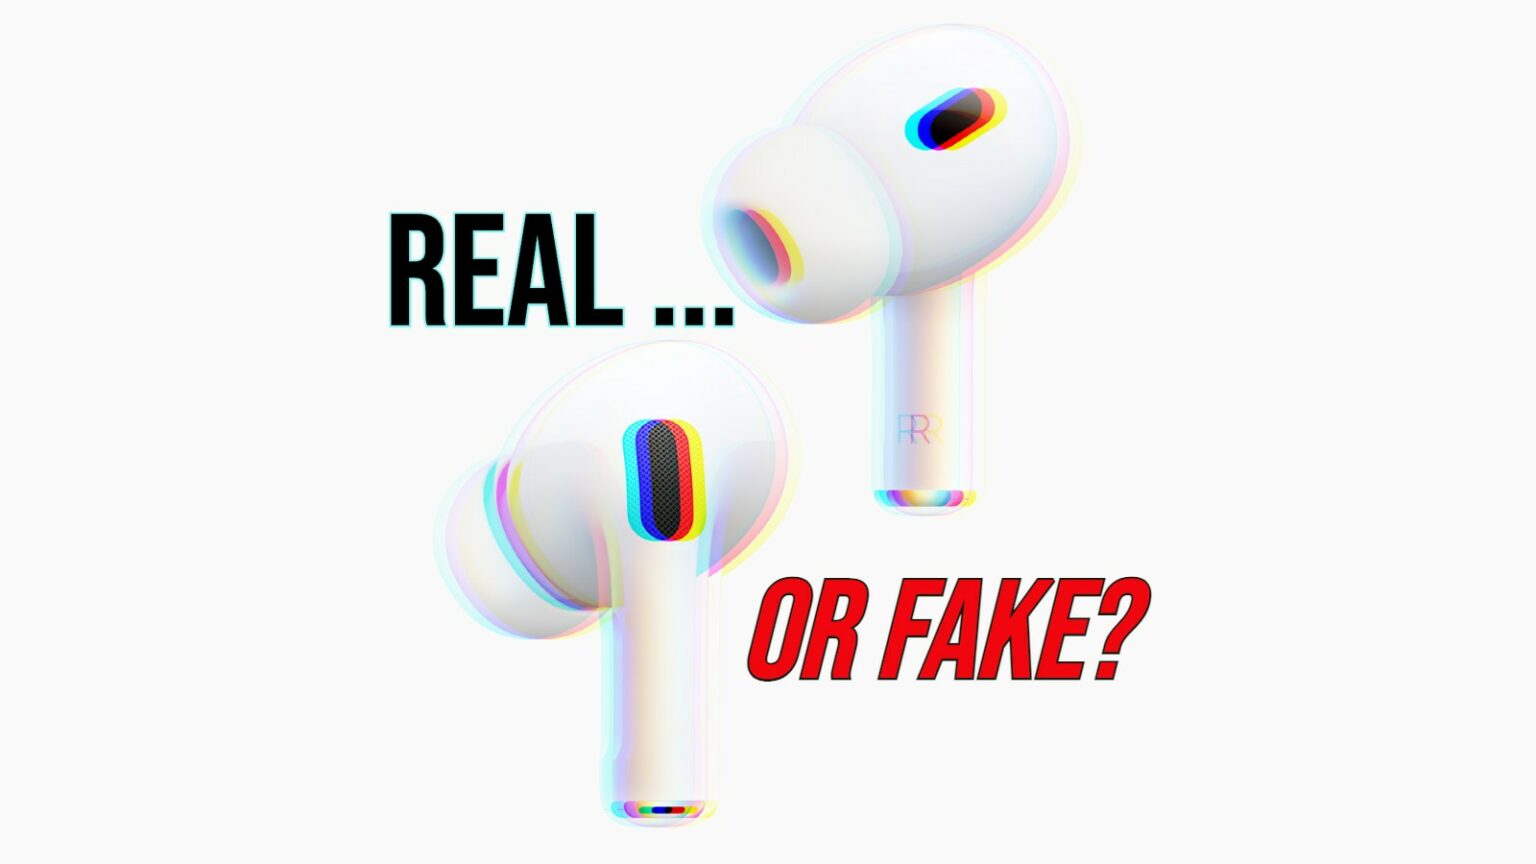 Real ... or fake? How to tell if AirPods are counterfeit products.